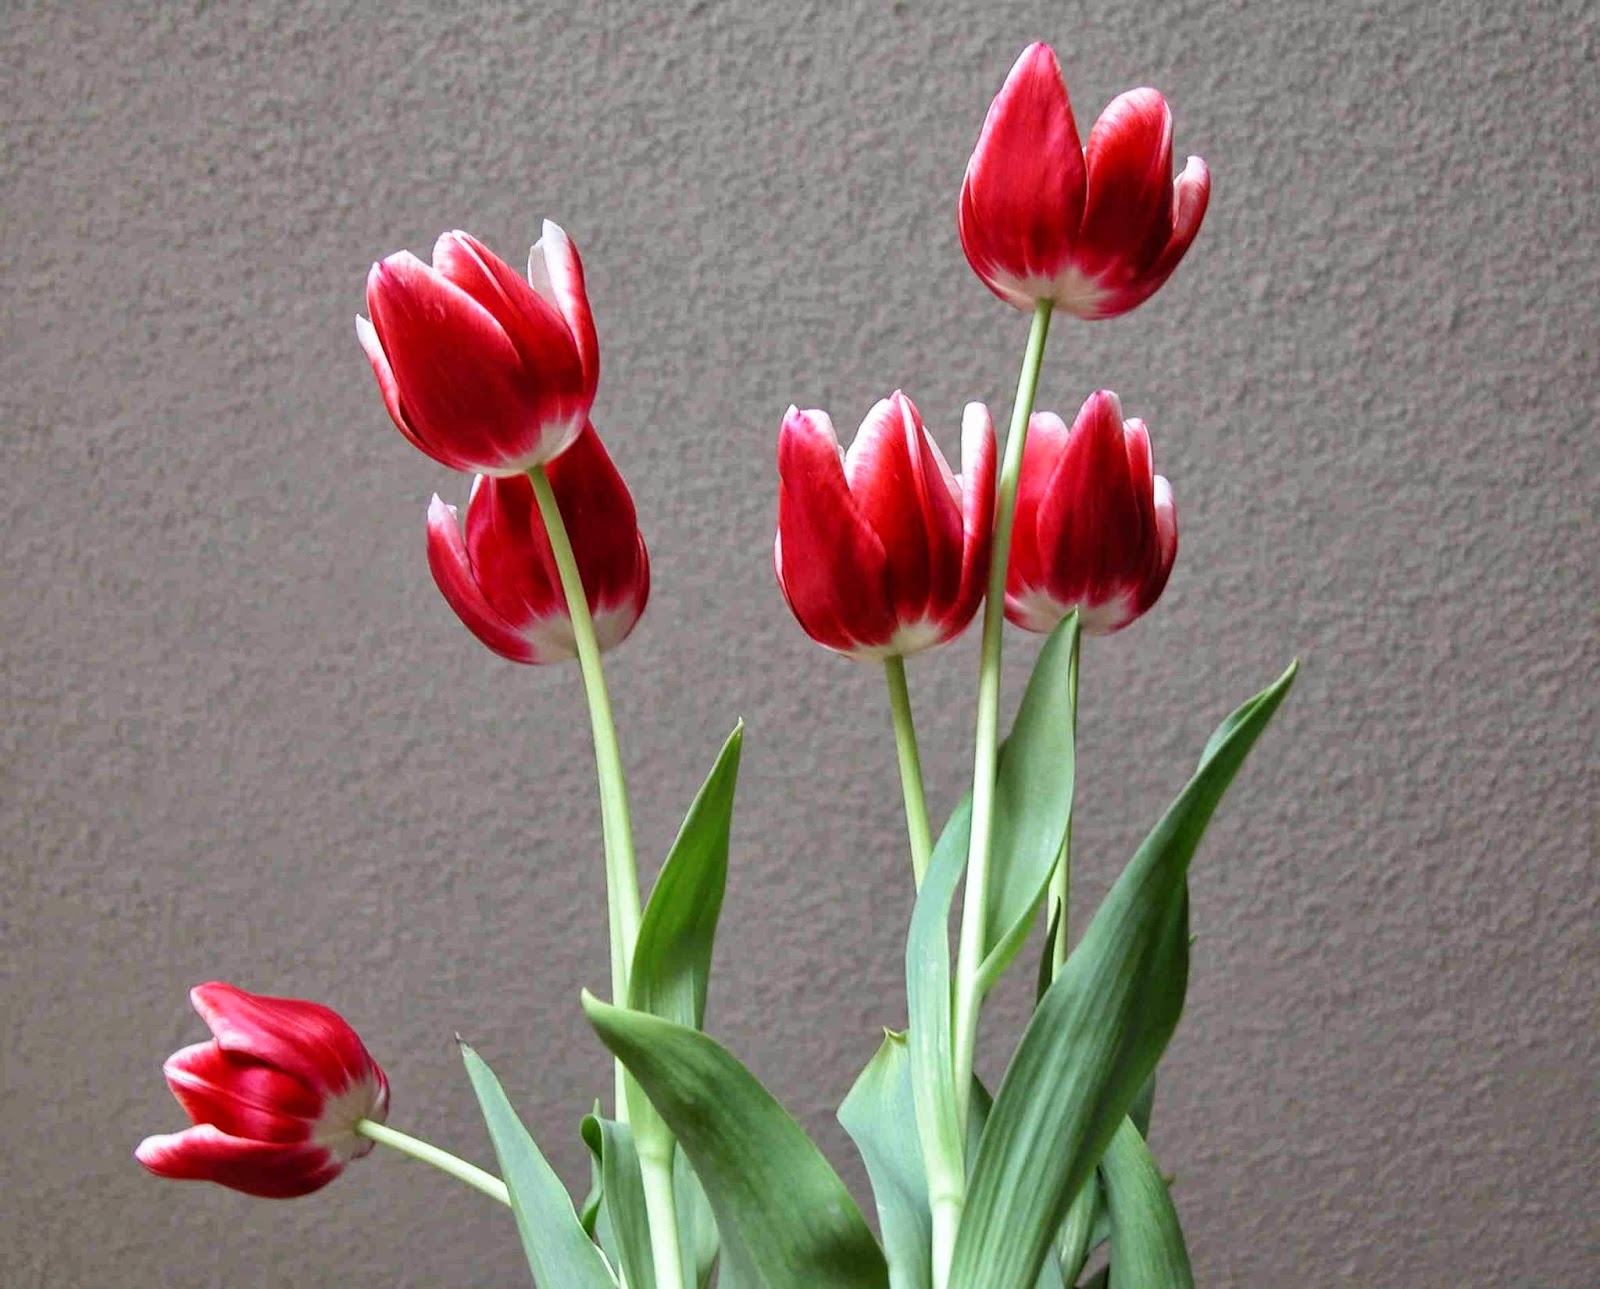 New House Girl: T is for Tulips